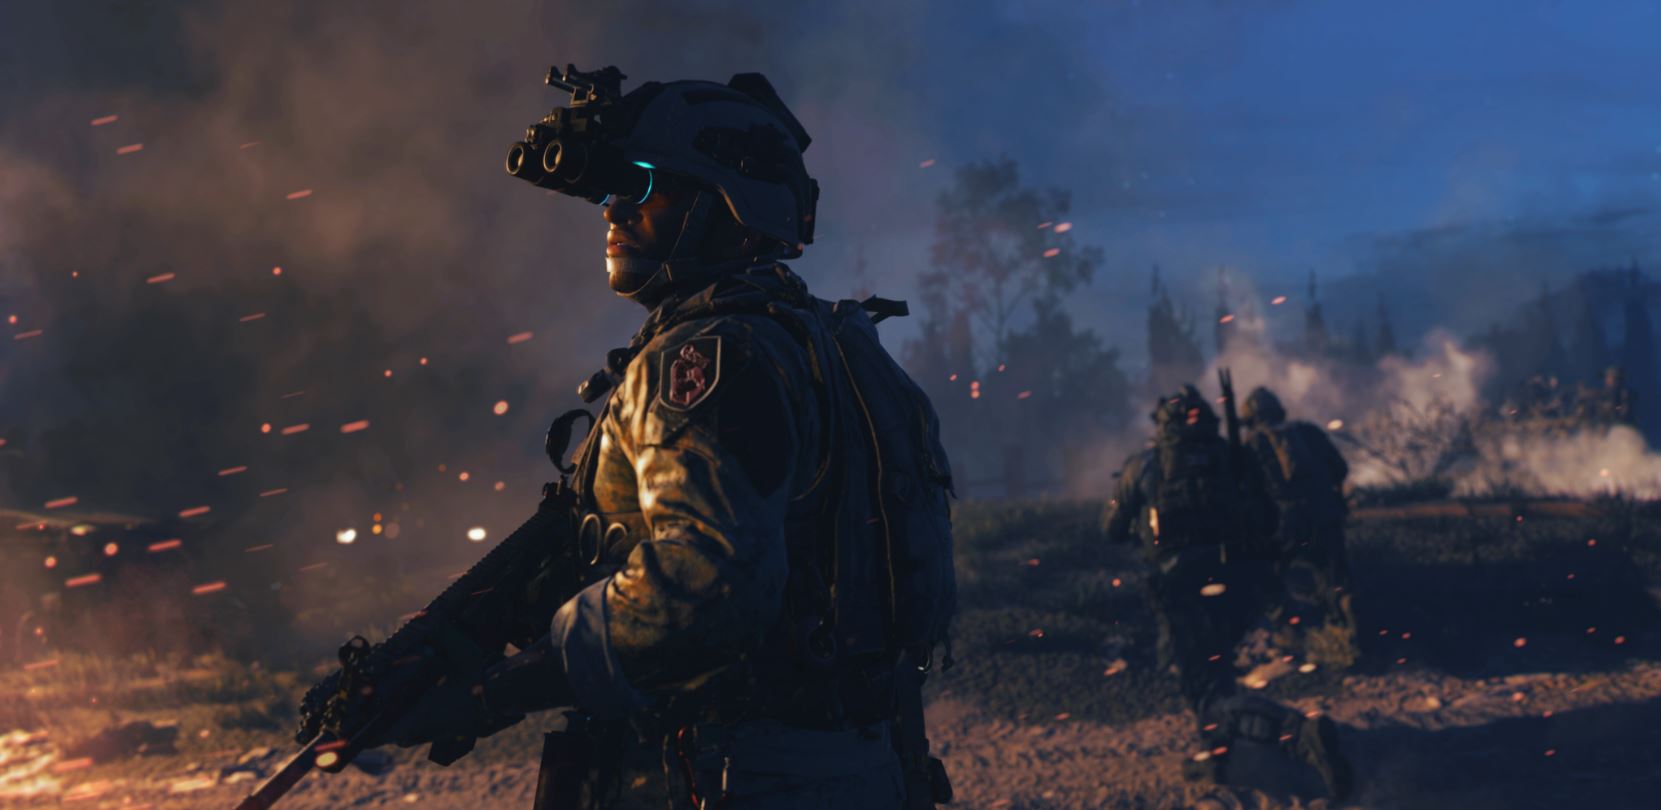 Call Of Duty: Modern Warfare Release Date, Trailer, Characters And Story